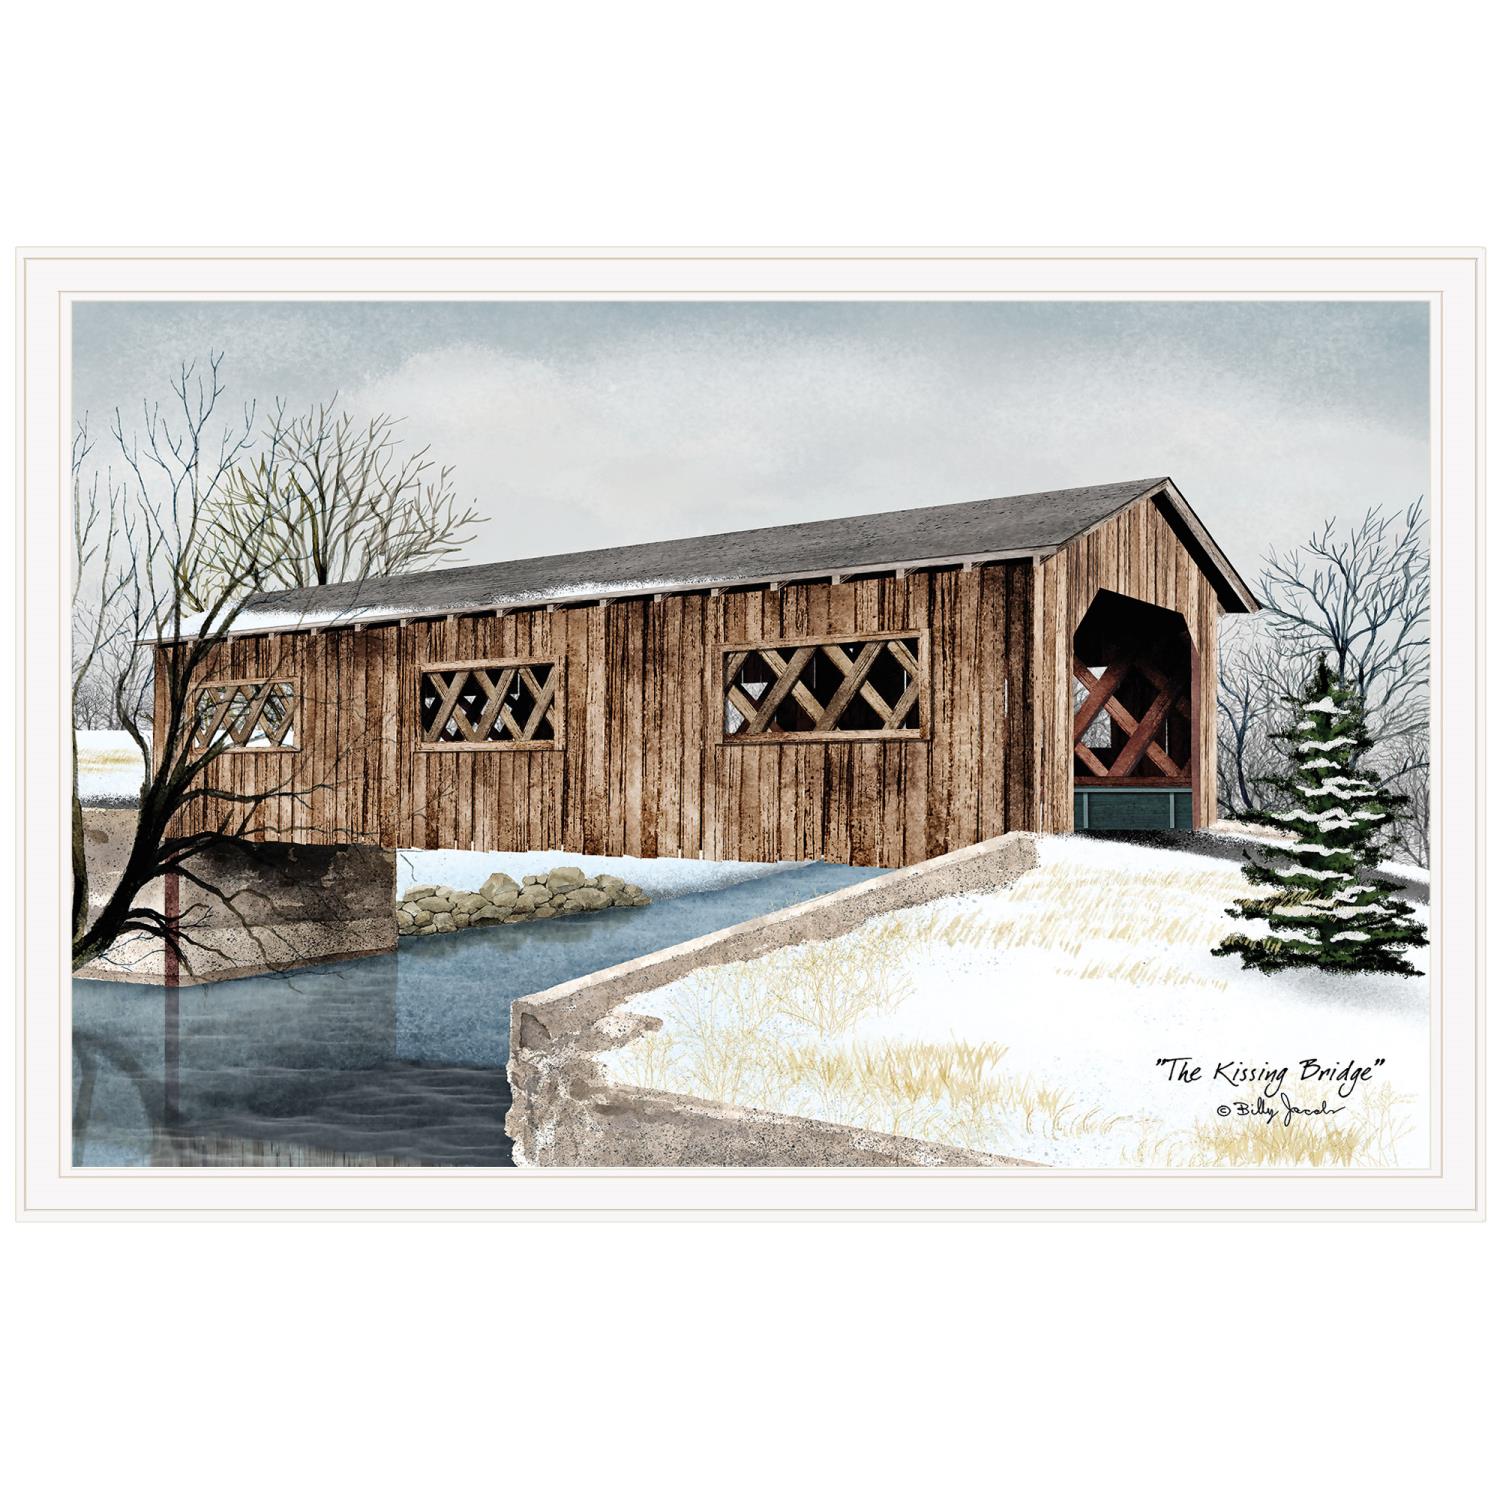 TrendyDecor4U "The Kissing Bridge" by Billy Jacobs, Ready to Hang Framed Print, White Frame